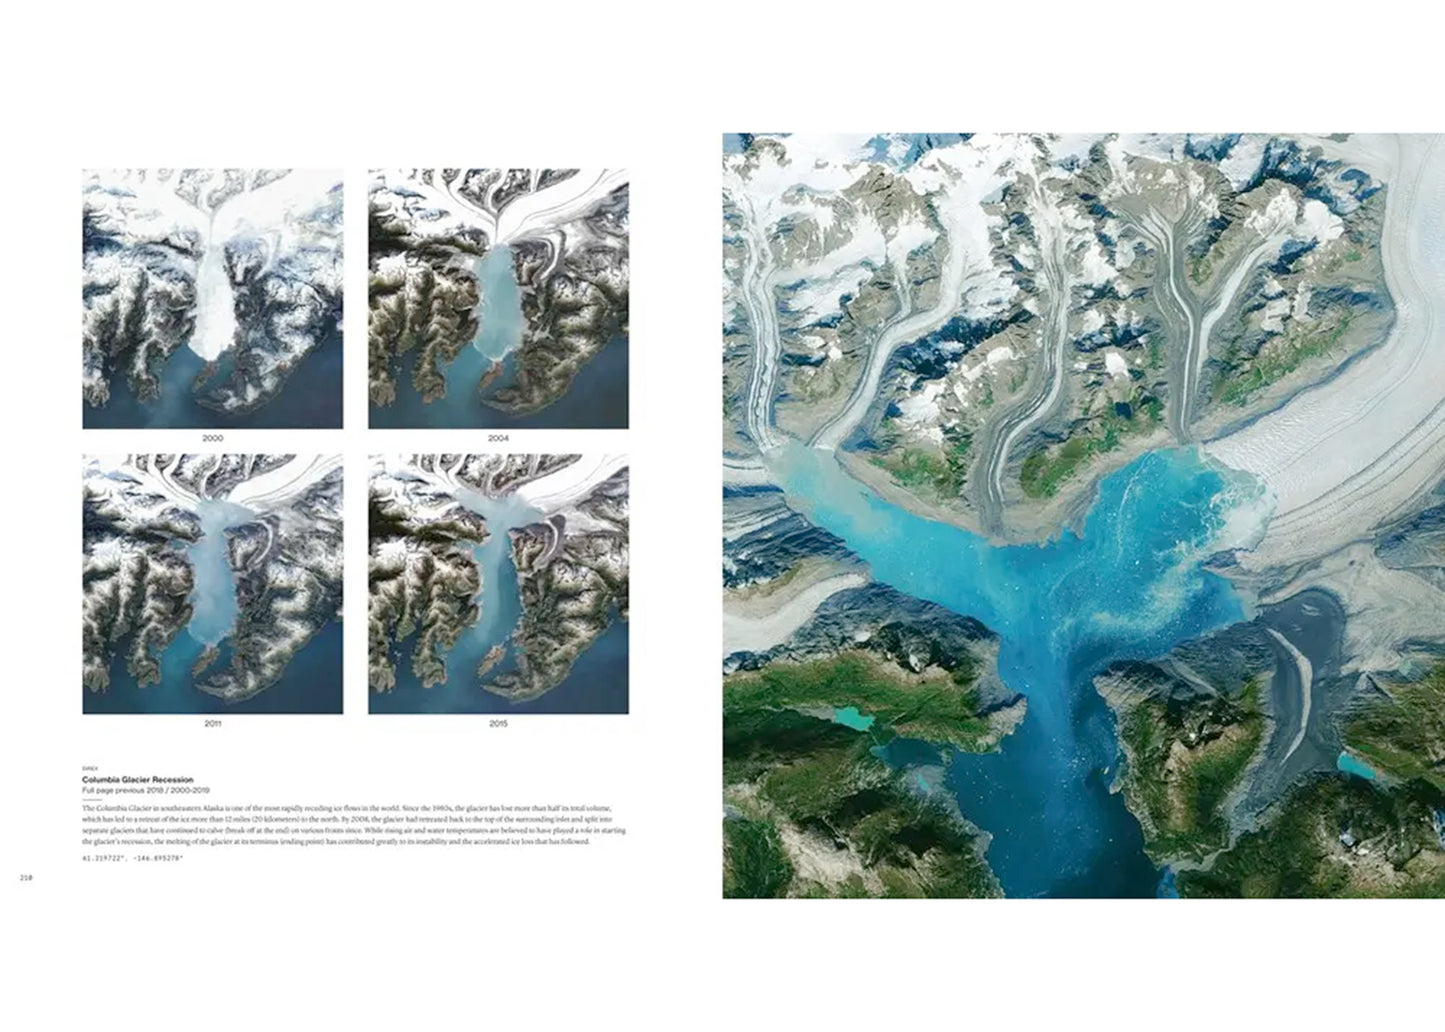 Timelapse: How We Change the Earth Book